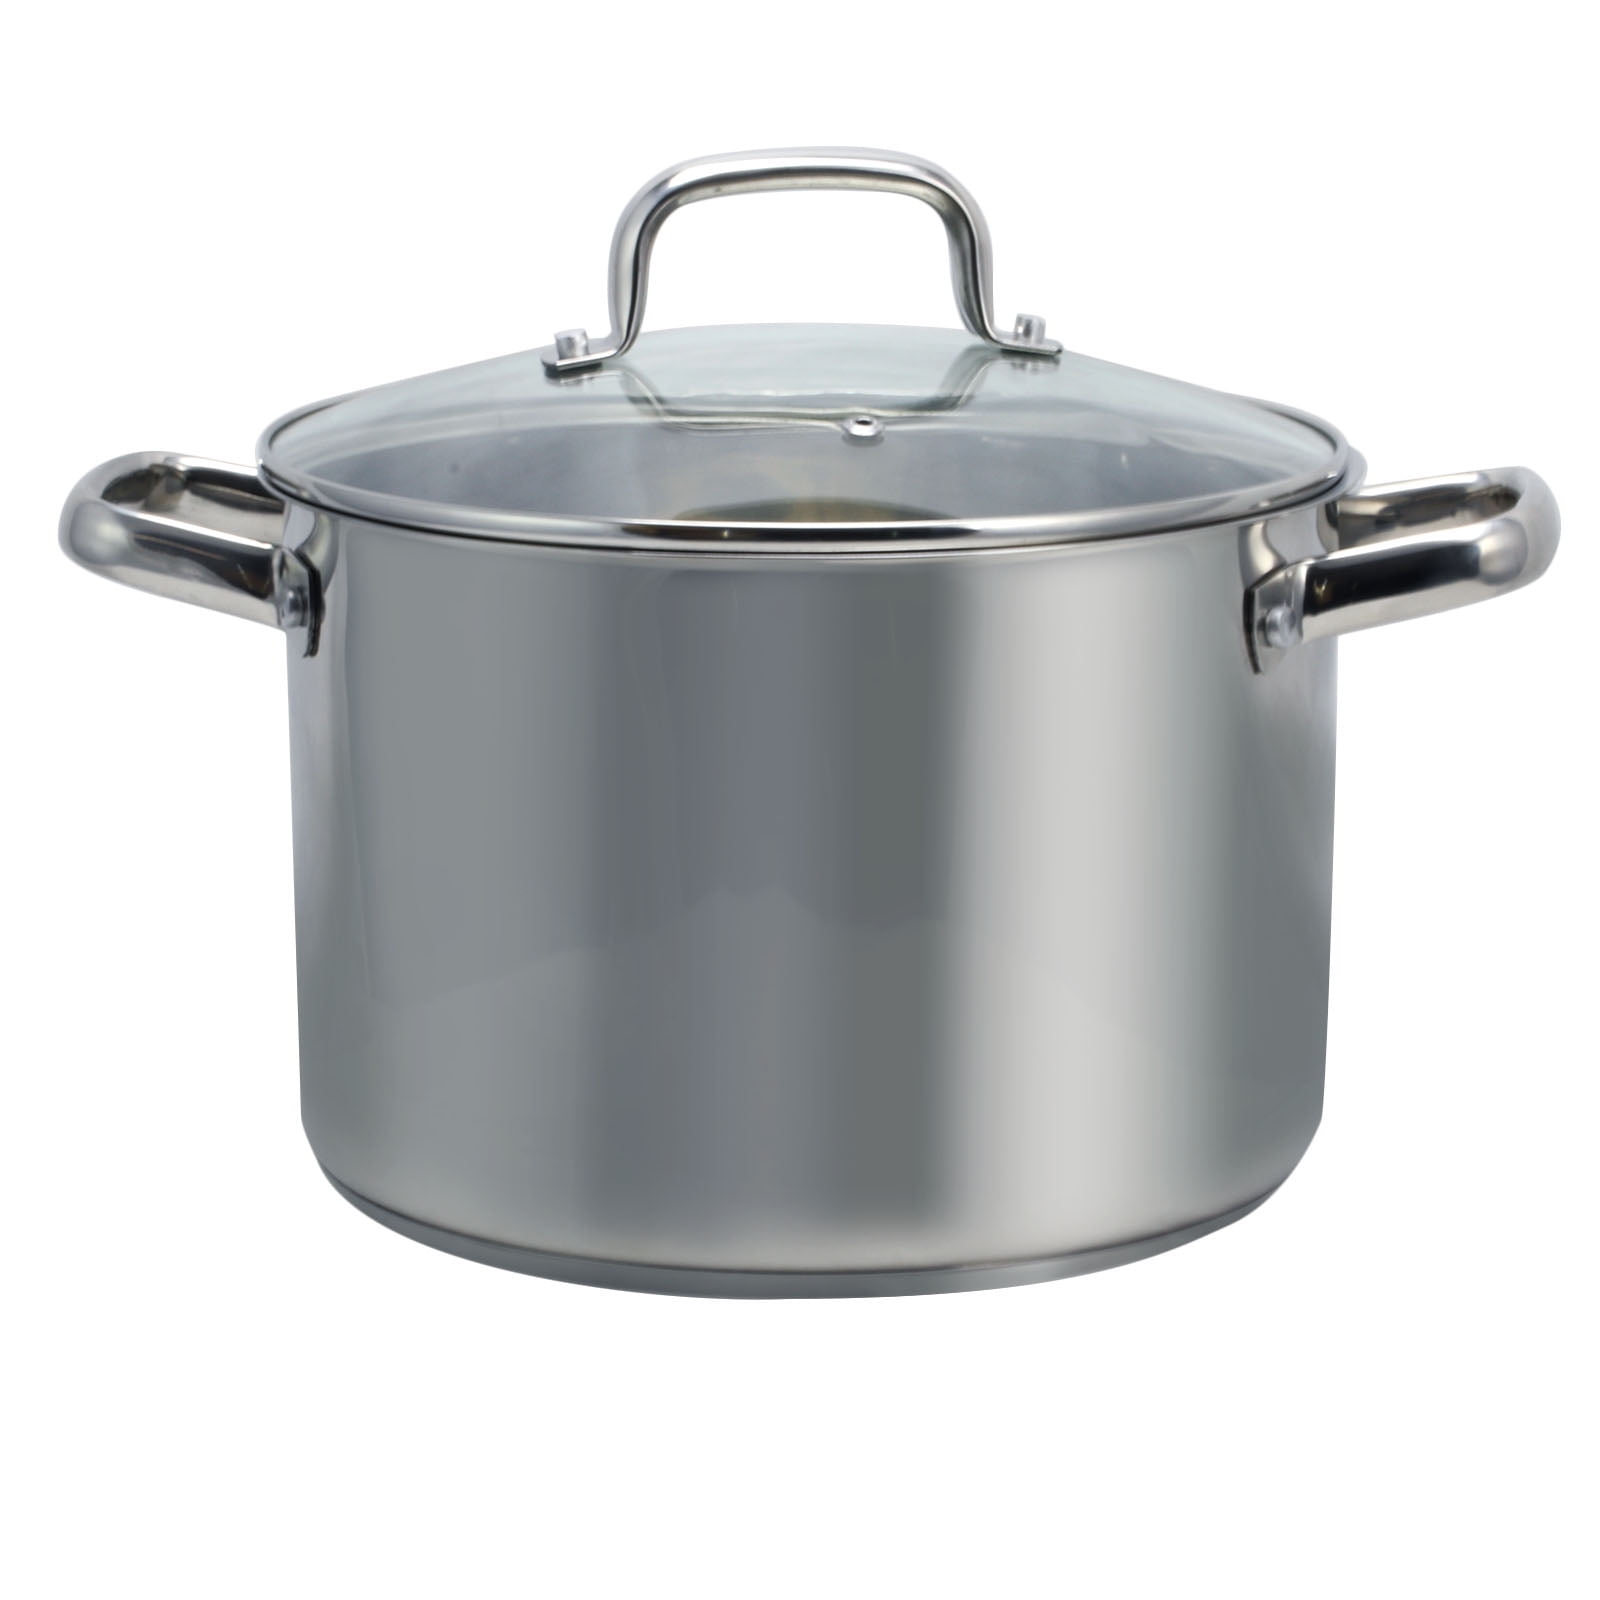 LIANYU 10 Quart Stock Pot with Lid, 10 QT 18/10 Stainless Steel Soup Pot,  Tri-Ply Heavy Duty Large Canning Pasta Pot, Big Deep Pot for Cooking